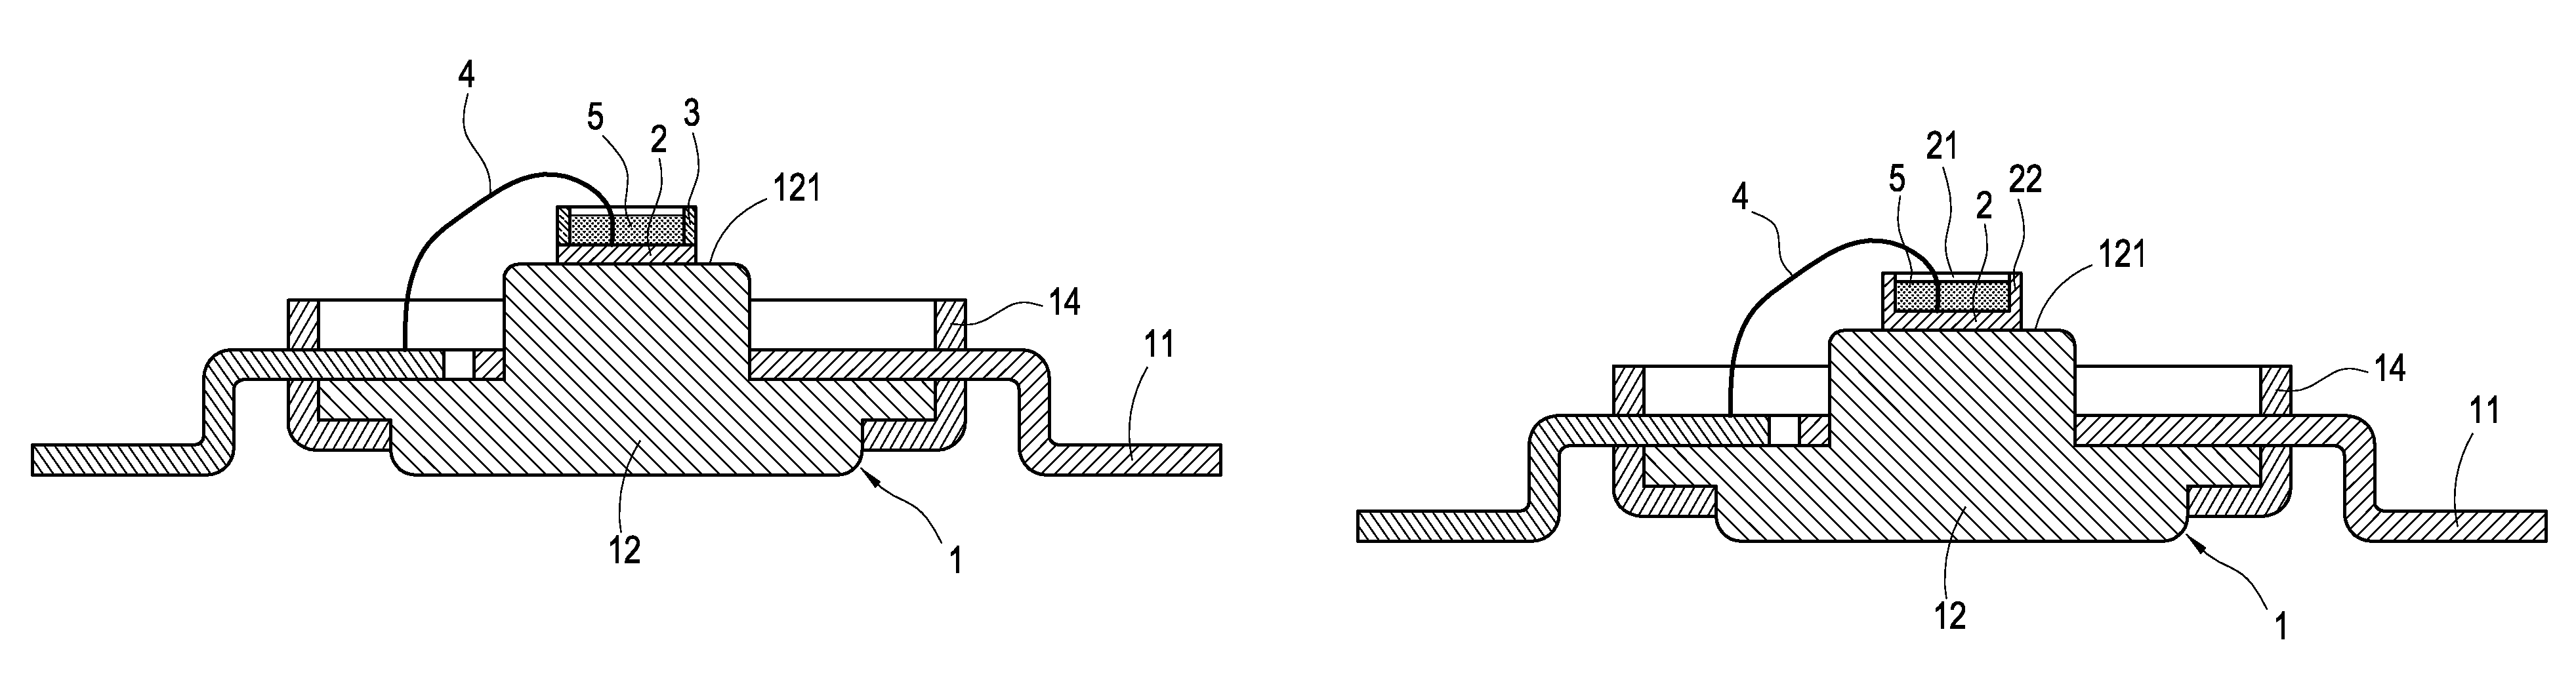 LED structure and fabricating method for the same